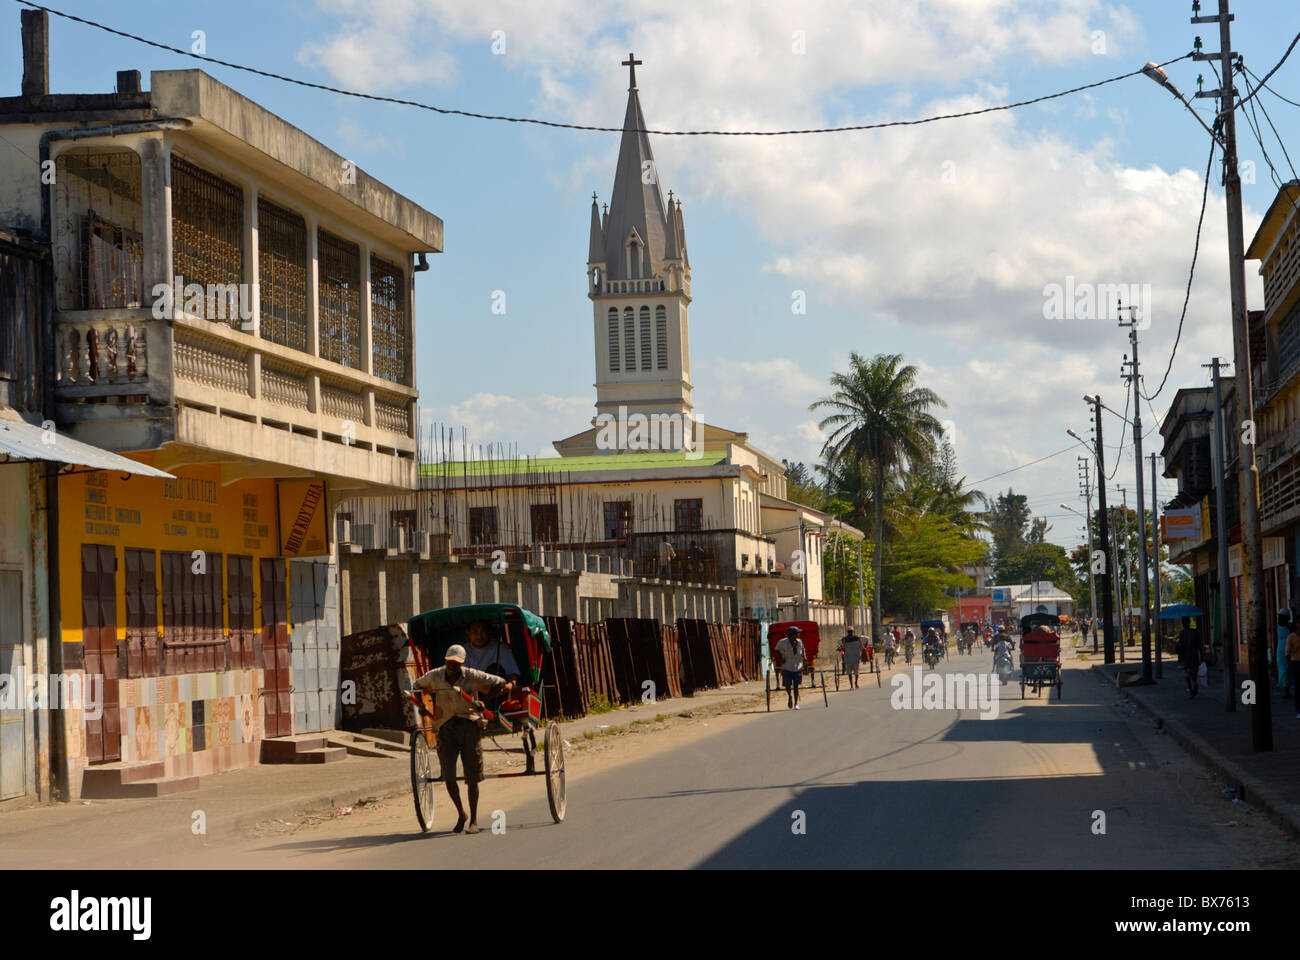 Old colonial church in Taomasina, Madagascar, Africa Stock Photo